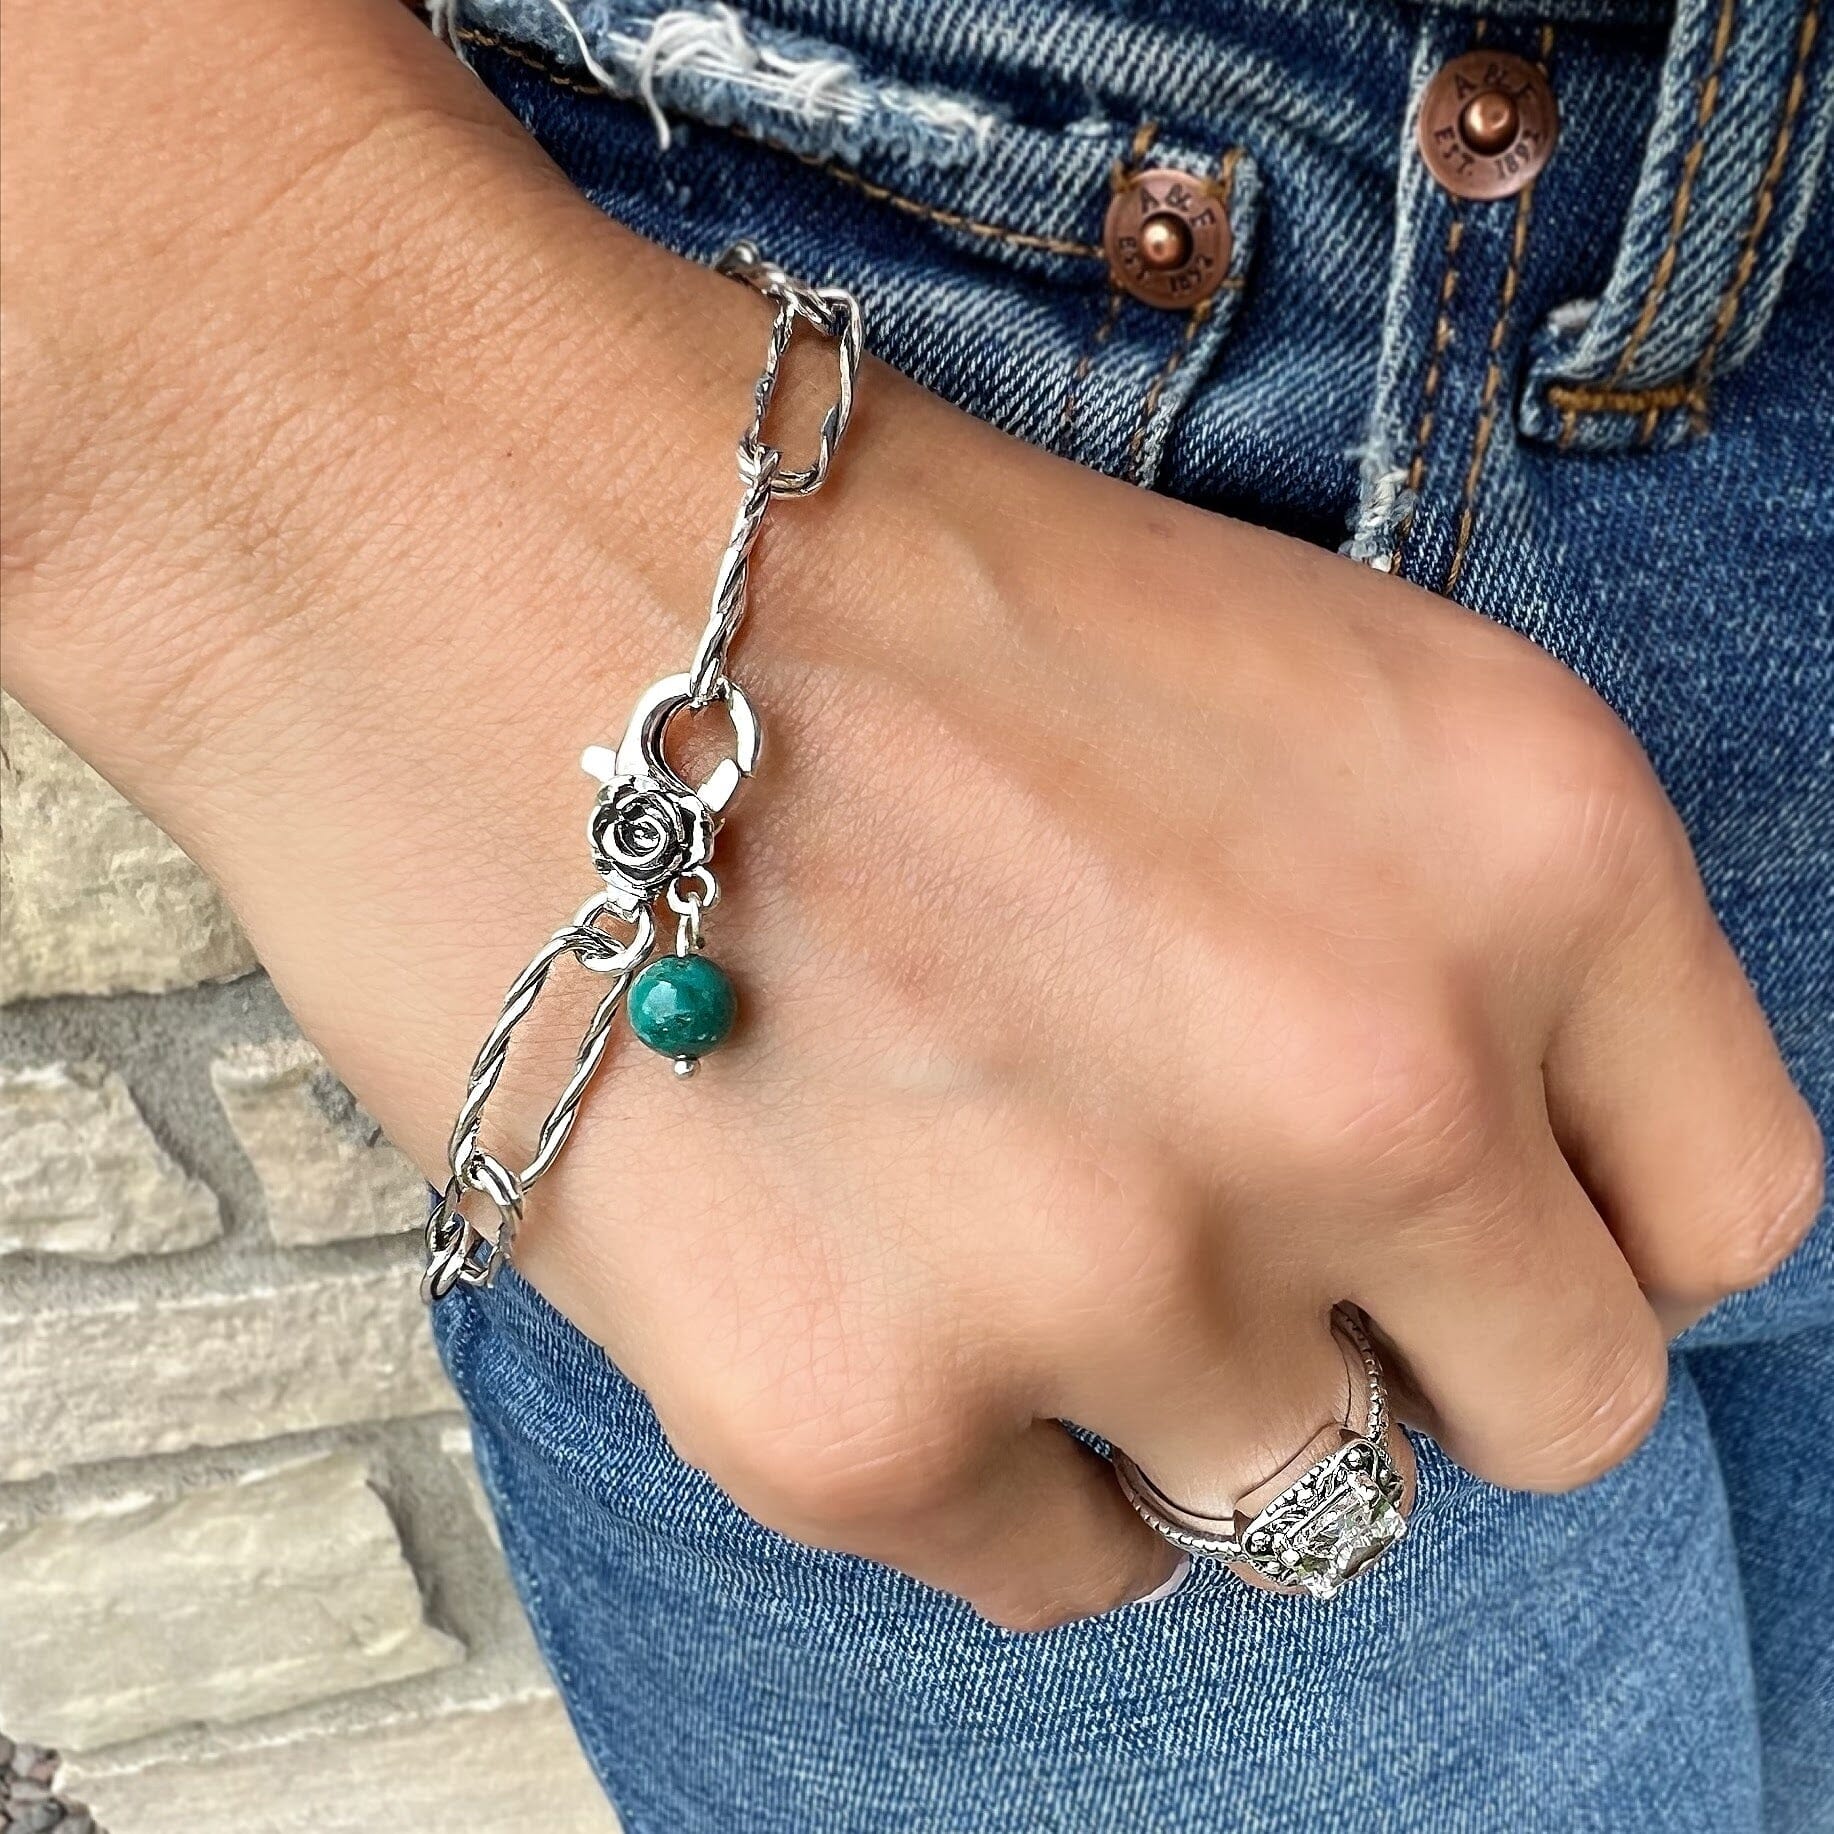 Turquoise Rose Bracelet paired with High Class Drama Ring